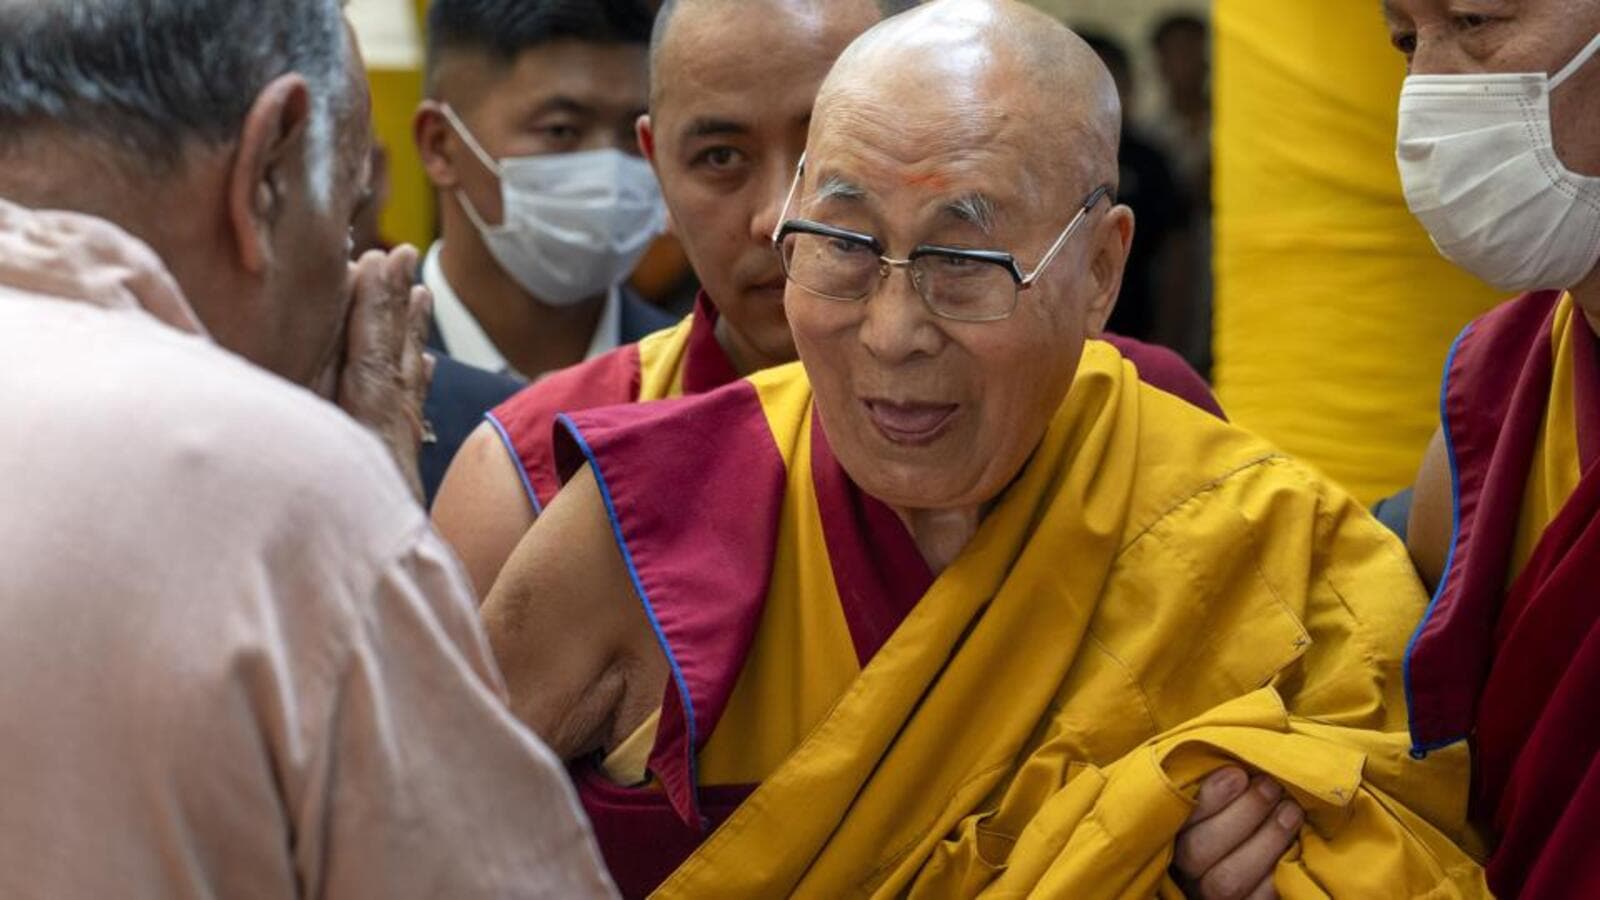 “Dalai Lama was only joking”: Delhi HC dismisses plea over video clip | Latest news from India